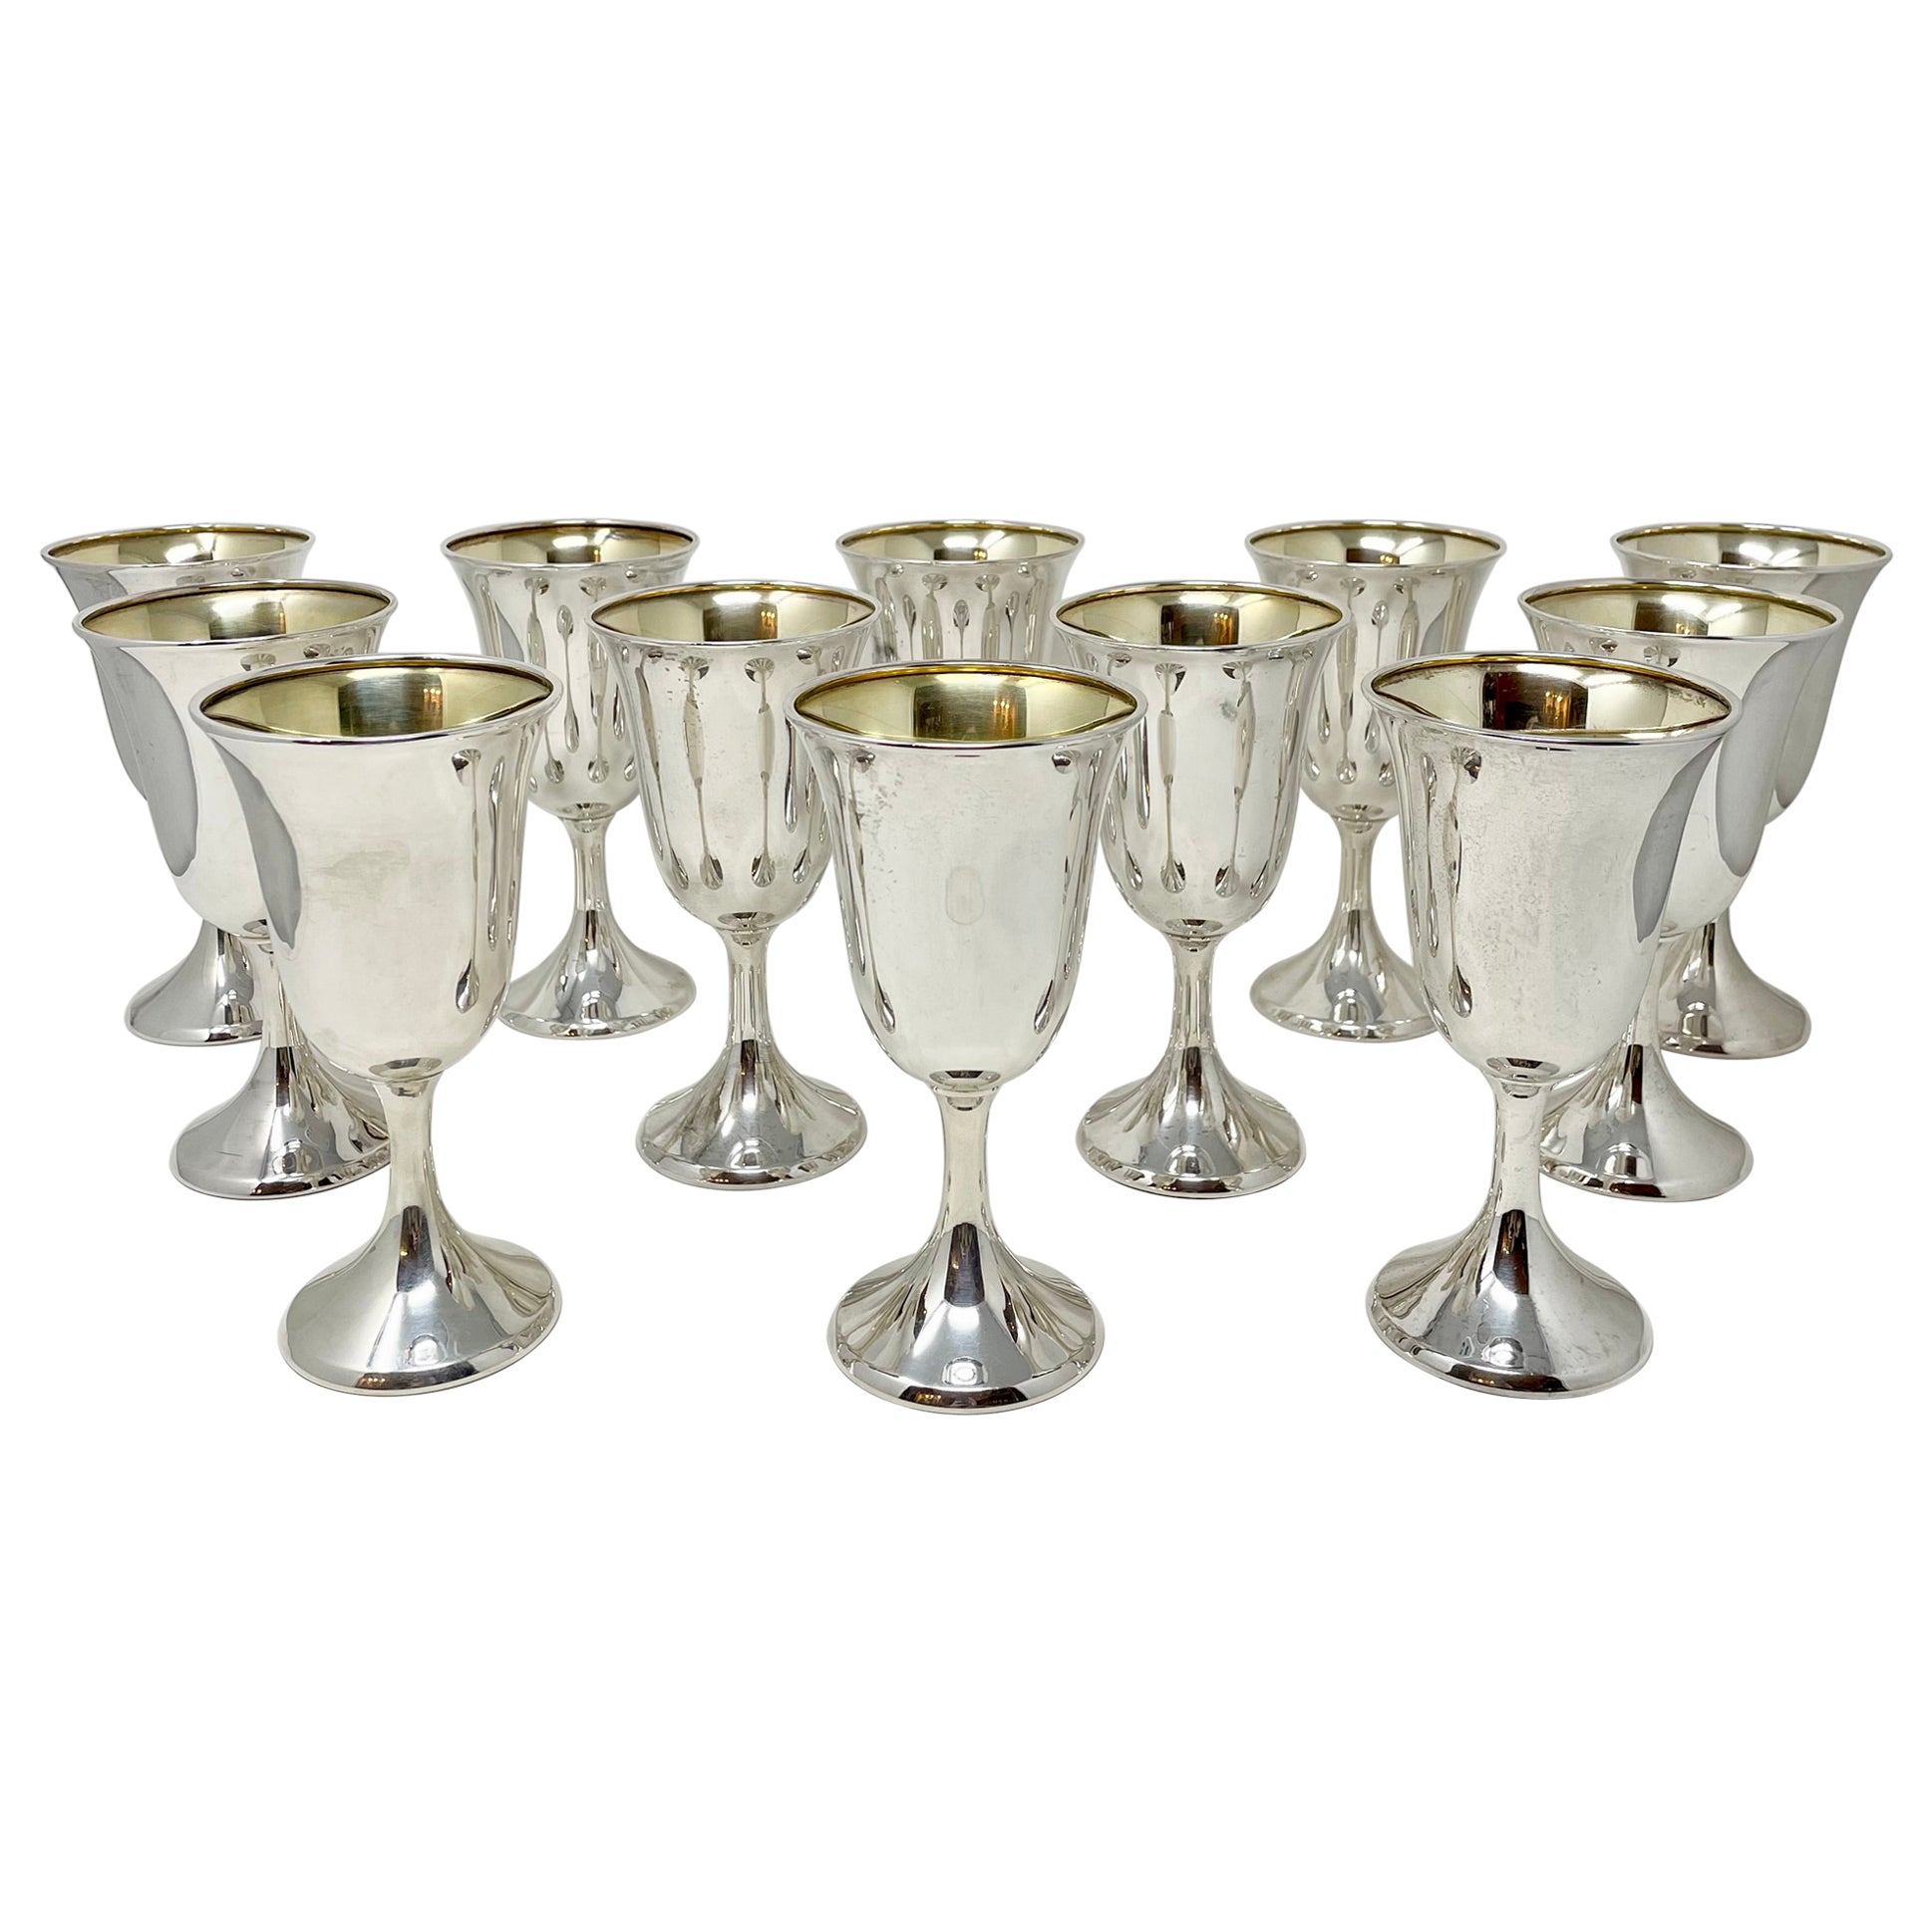 Set of 12 Estate American Hallmarked Sterling Silver Goblets, Circa 1950's For Sale